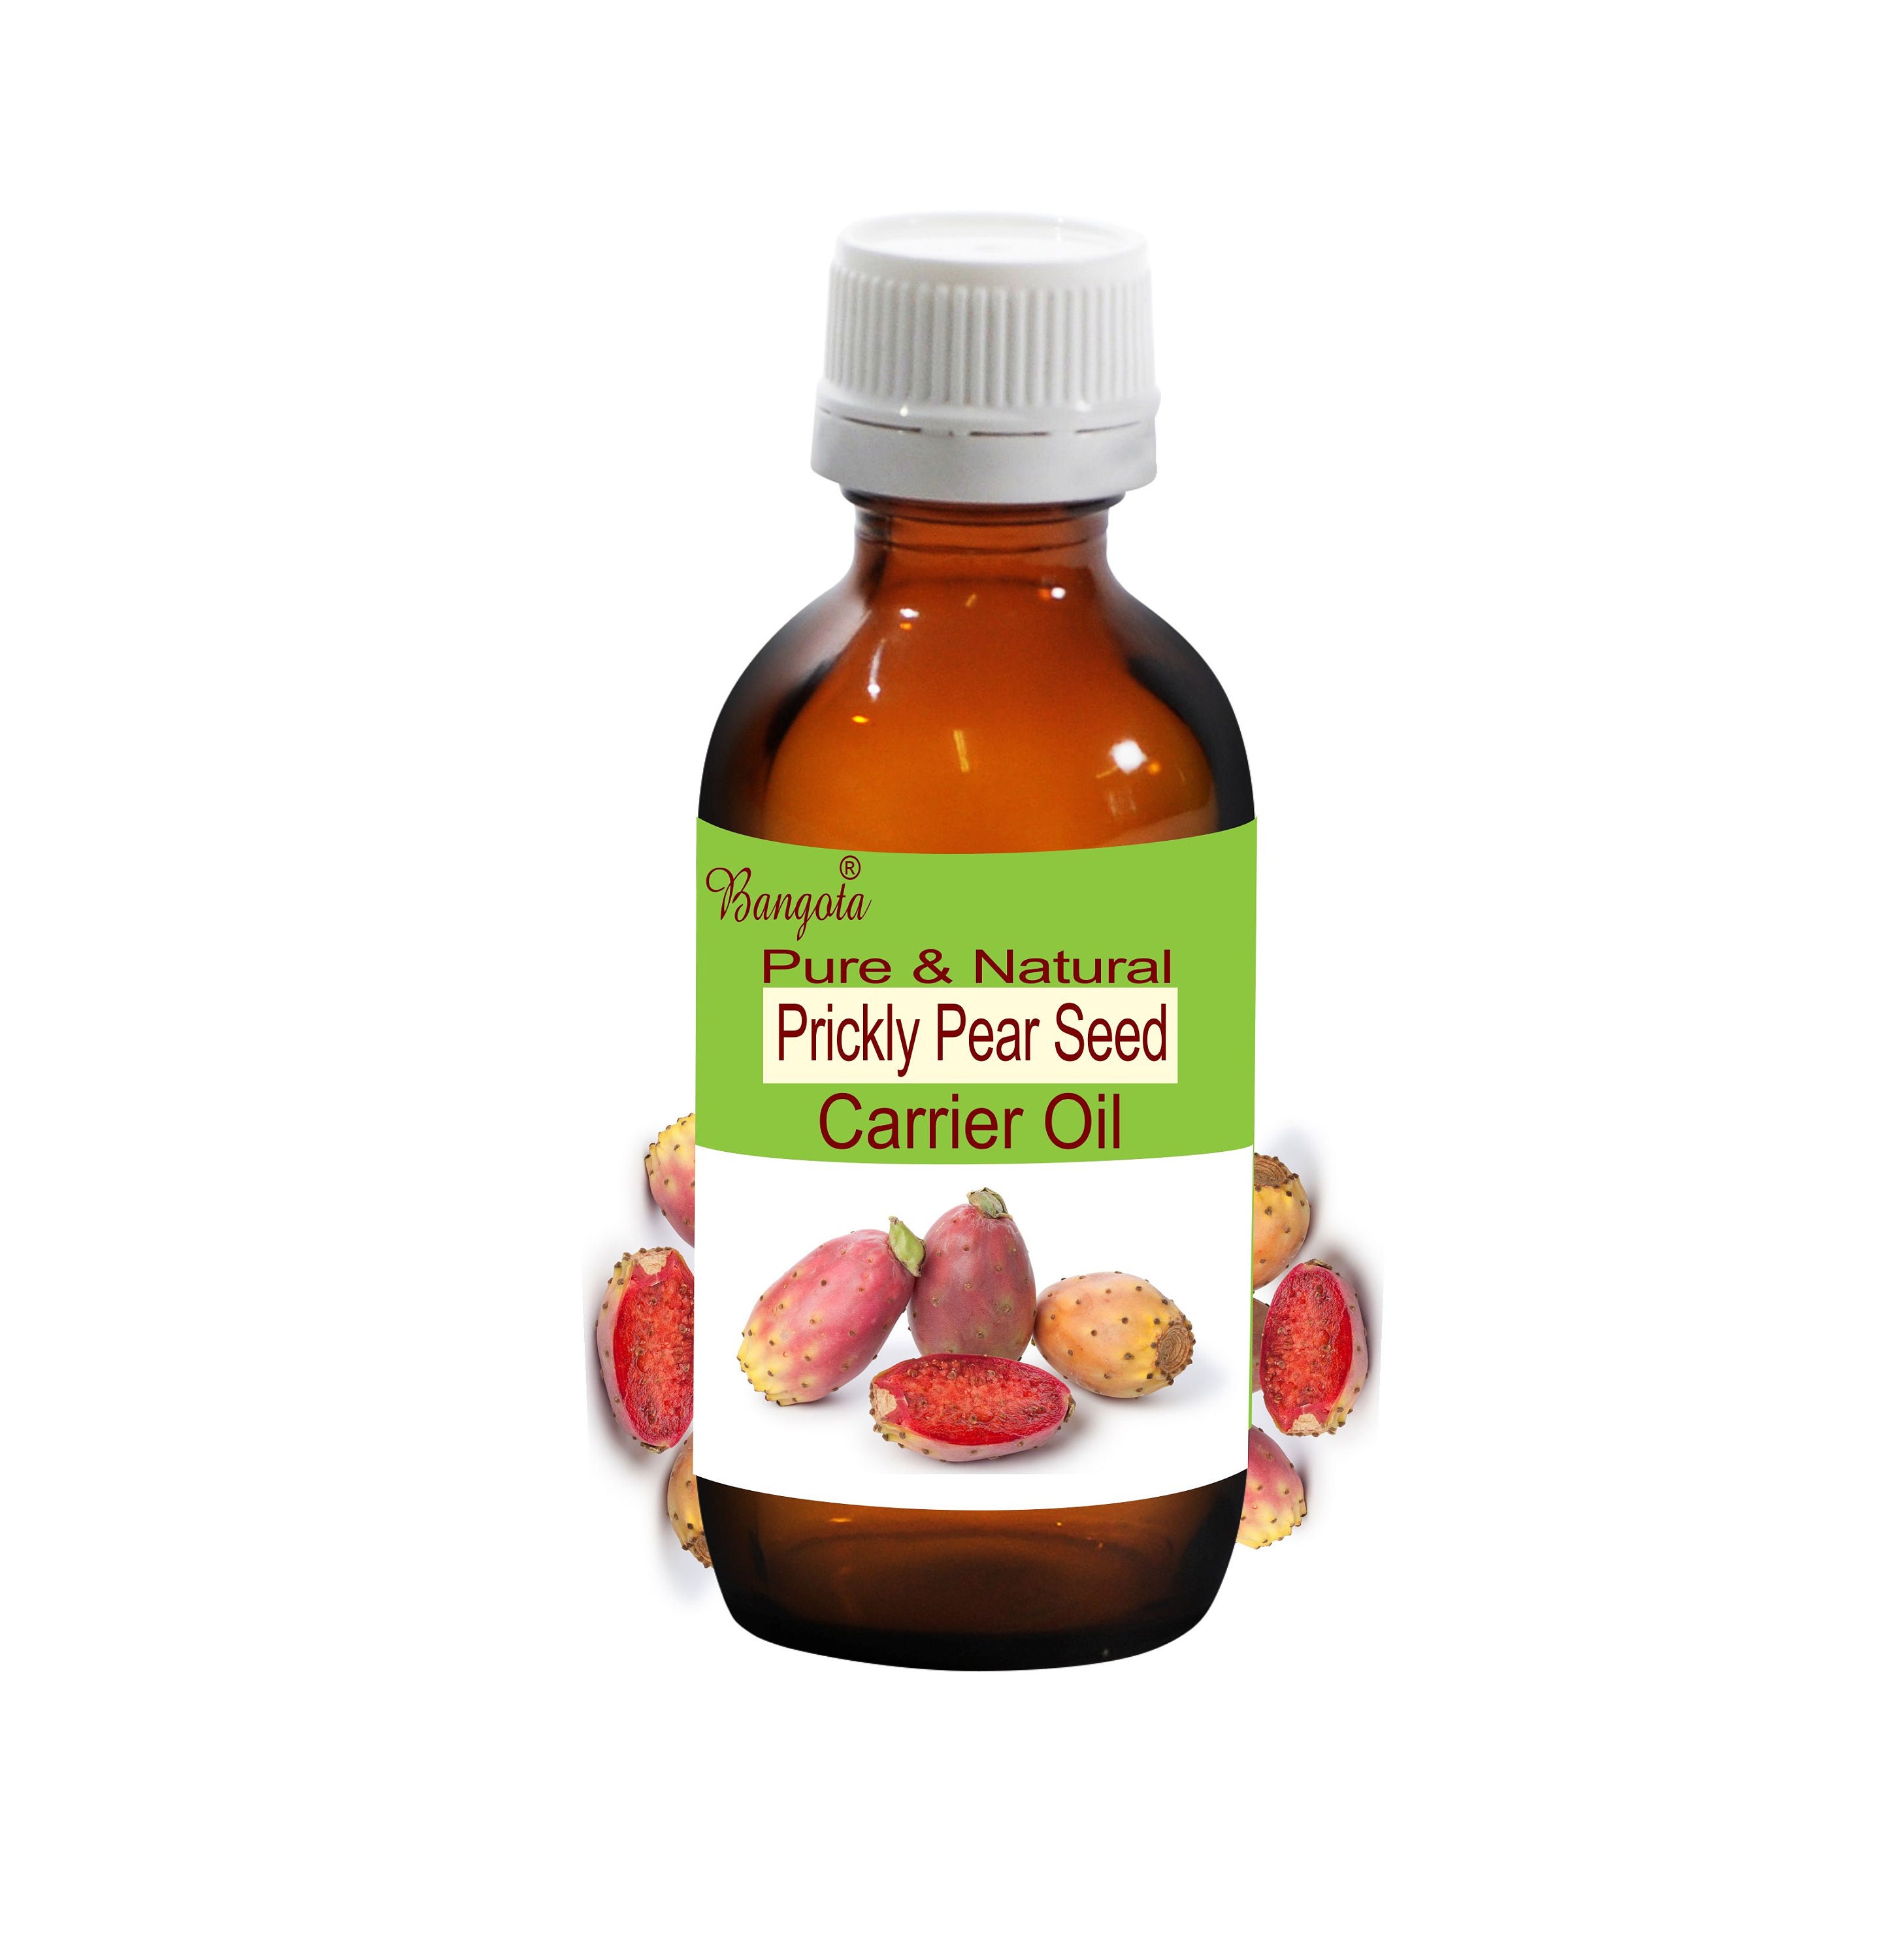 Prickly Pear Seed Carrier Oil